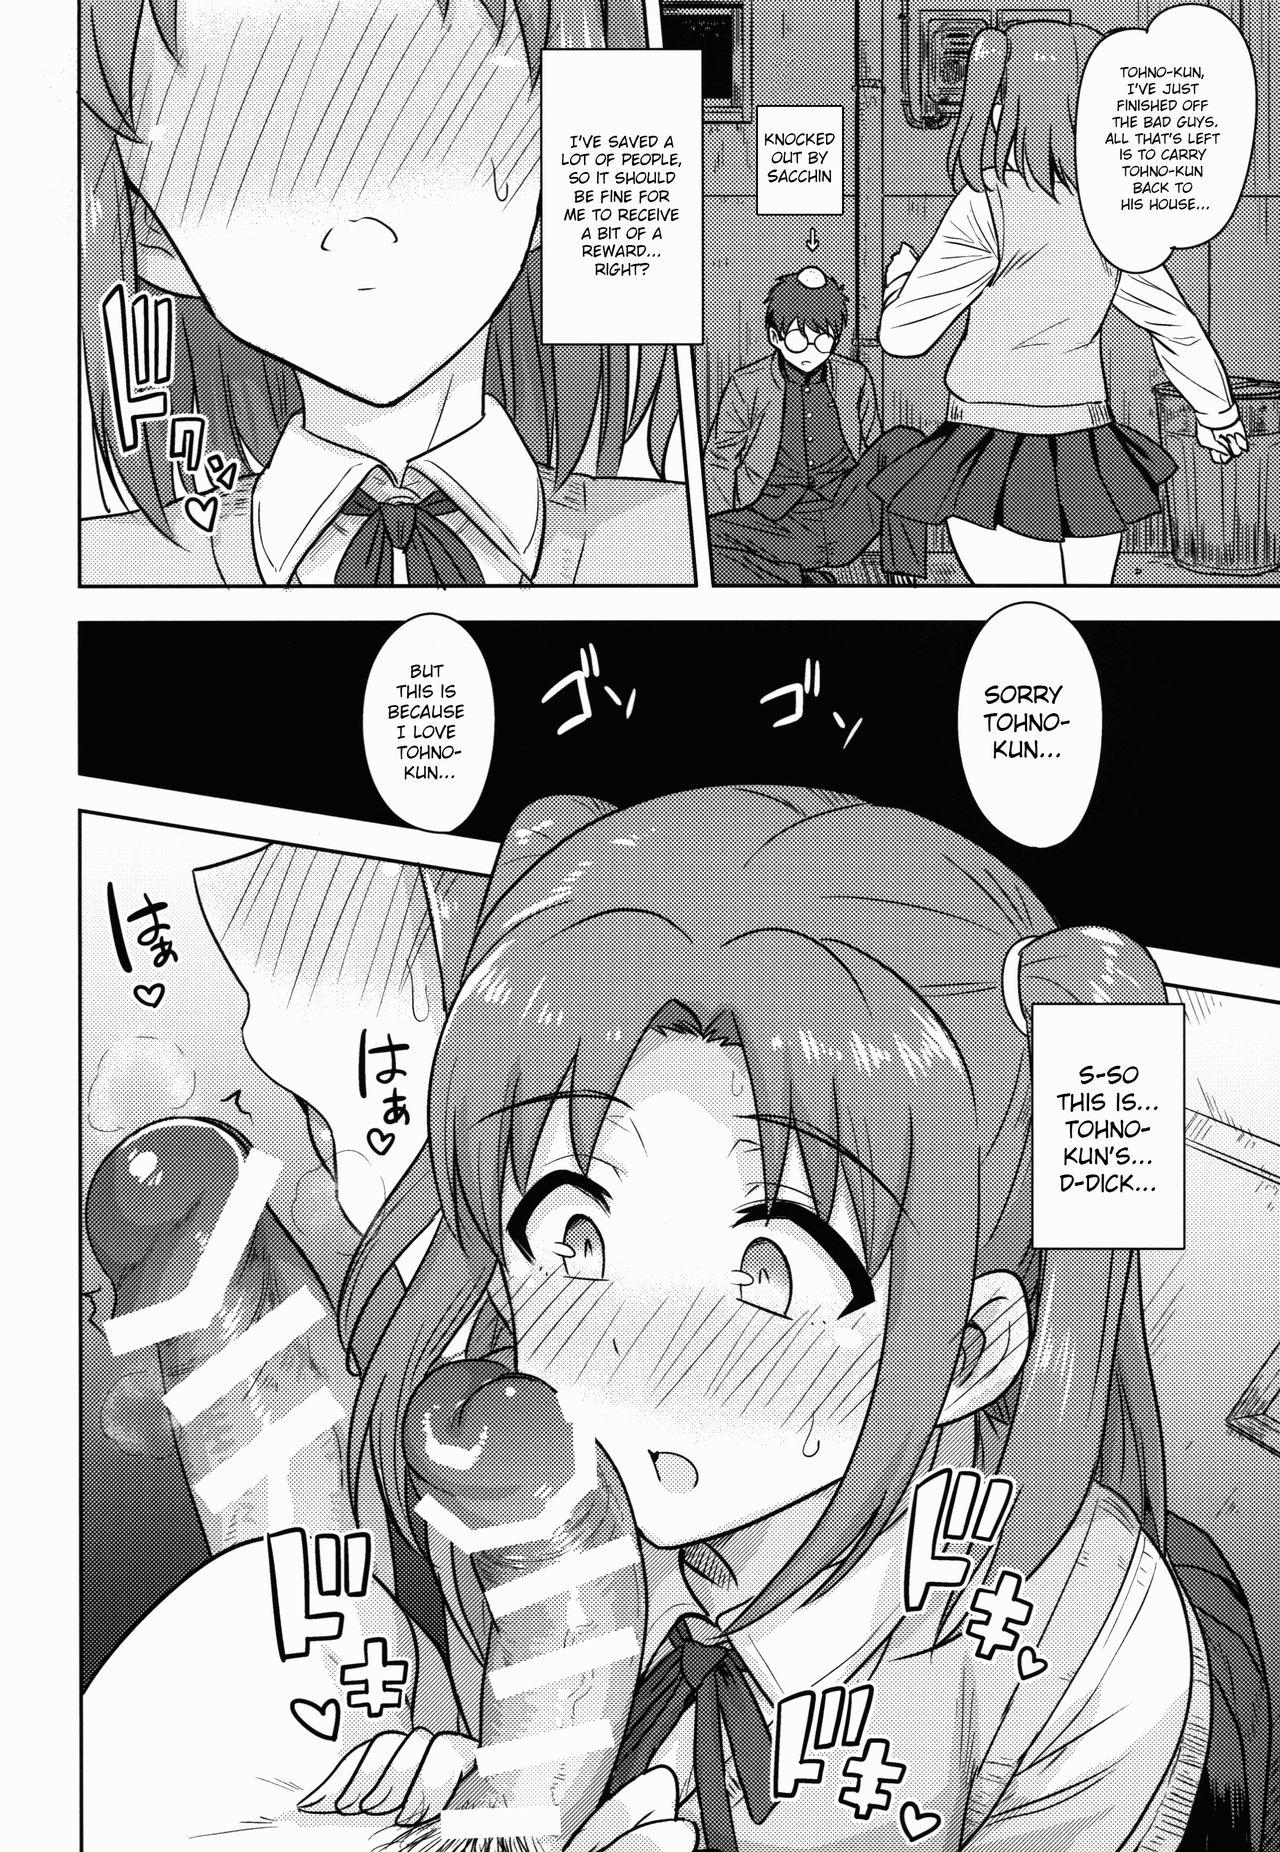 Spoon Aru Hi no Futari MelBlo Hen | A Certain Day with Each Other Melty Blood Hen - Tsukihime Penis Sucking - Page 9